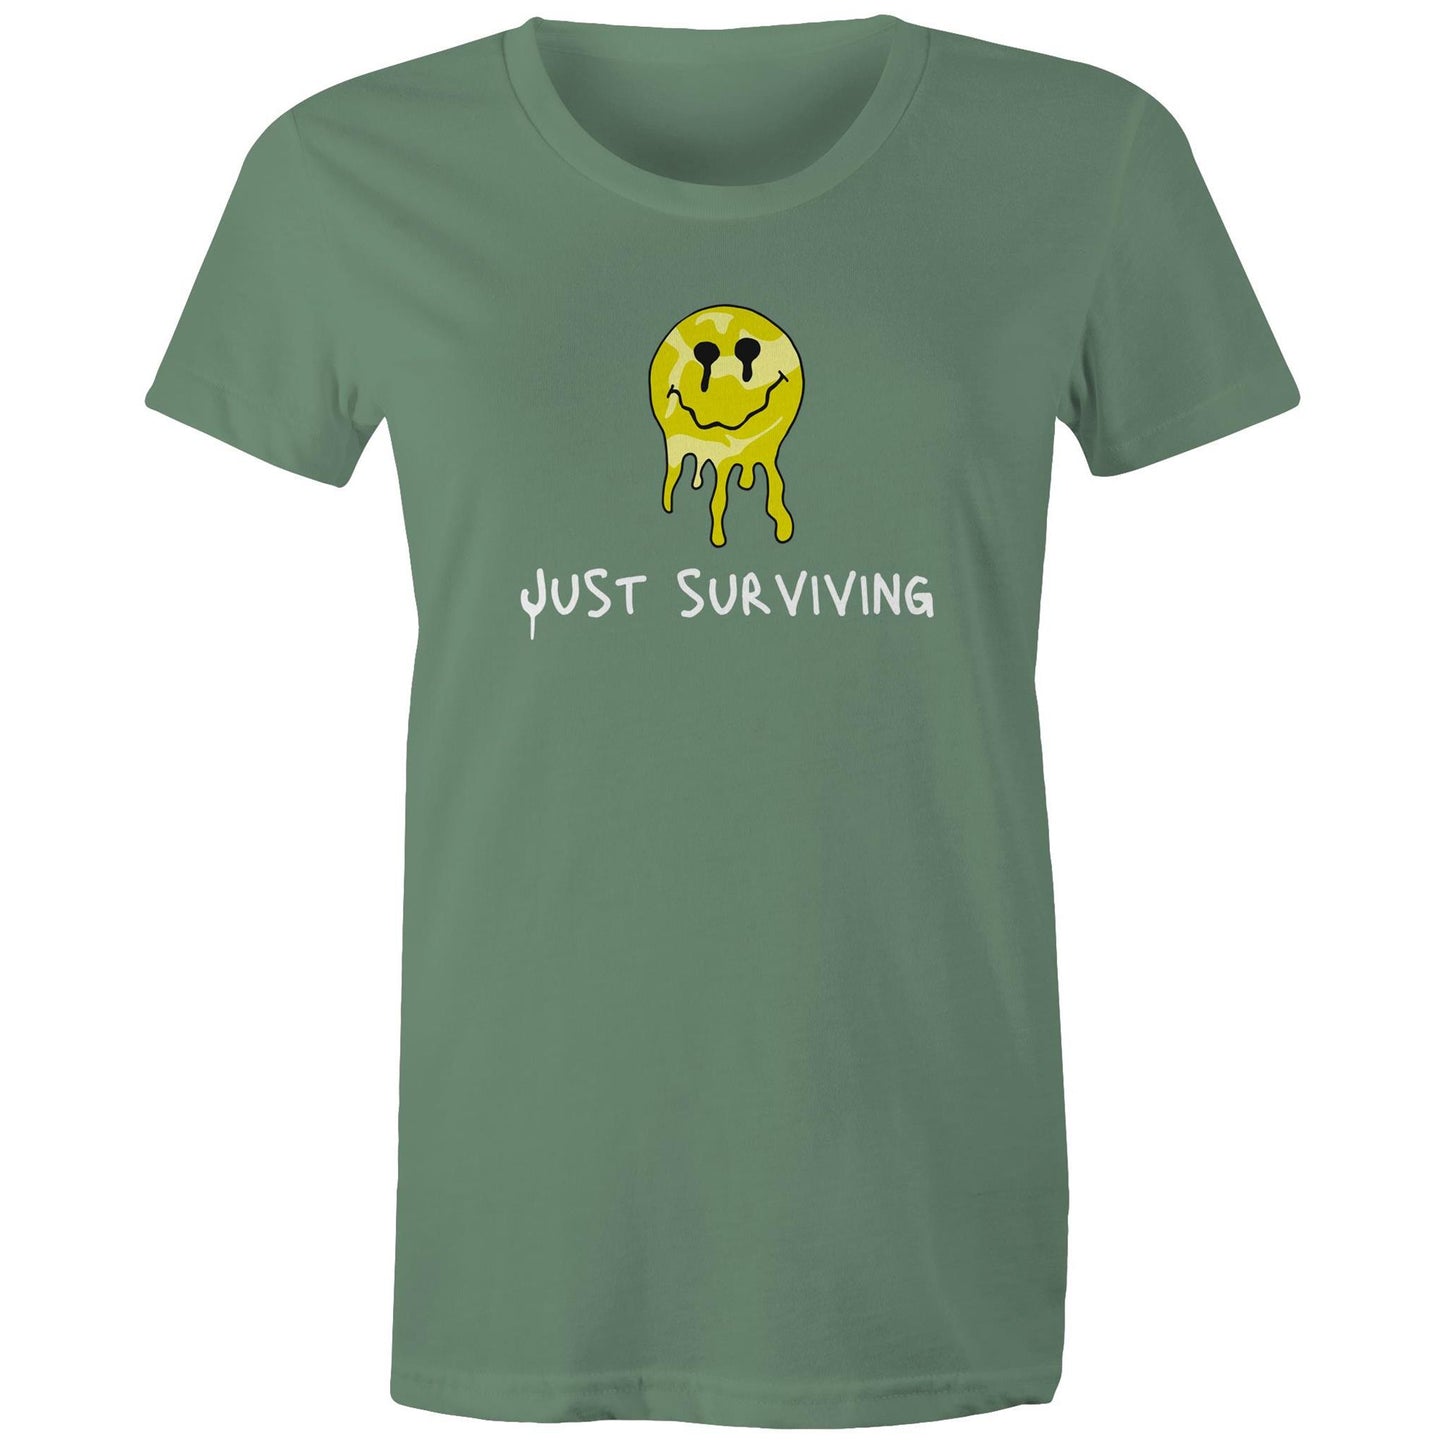 Womens Tee - Just Surviving